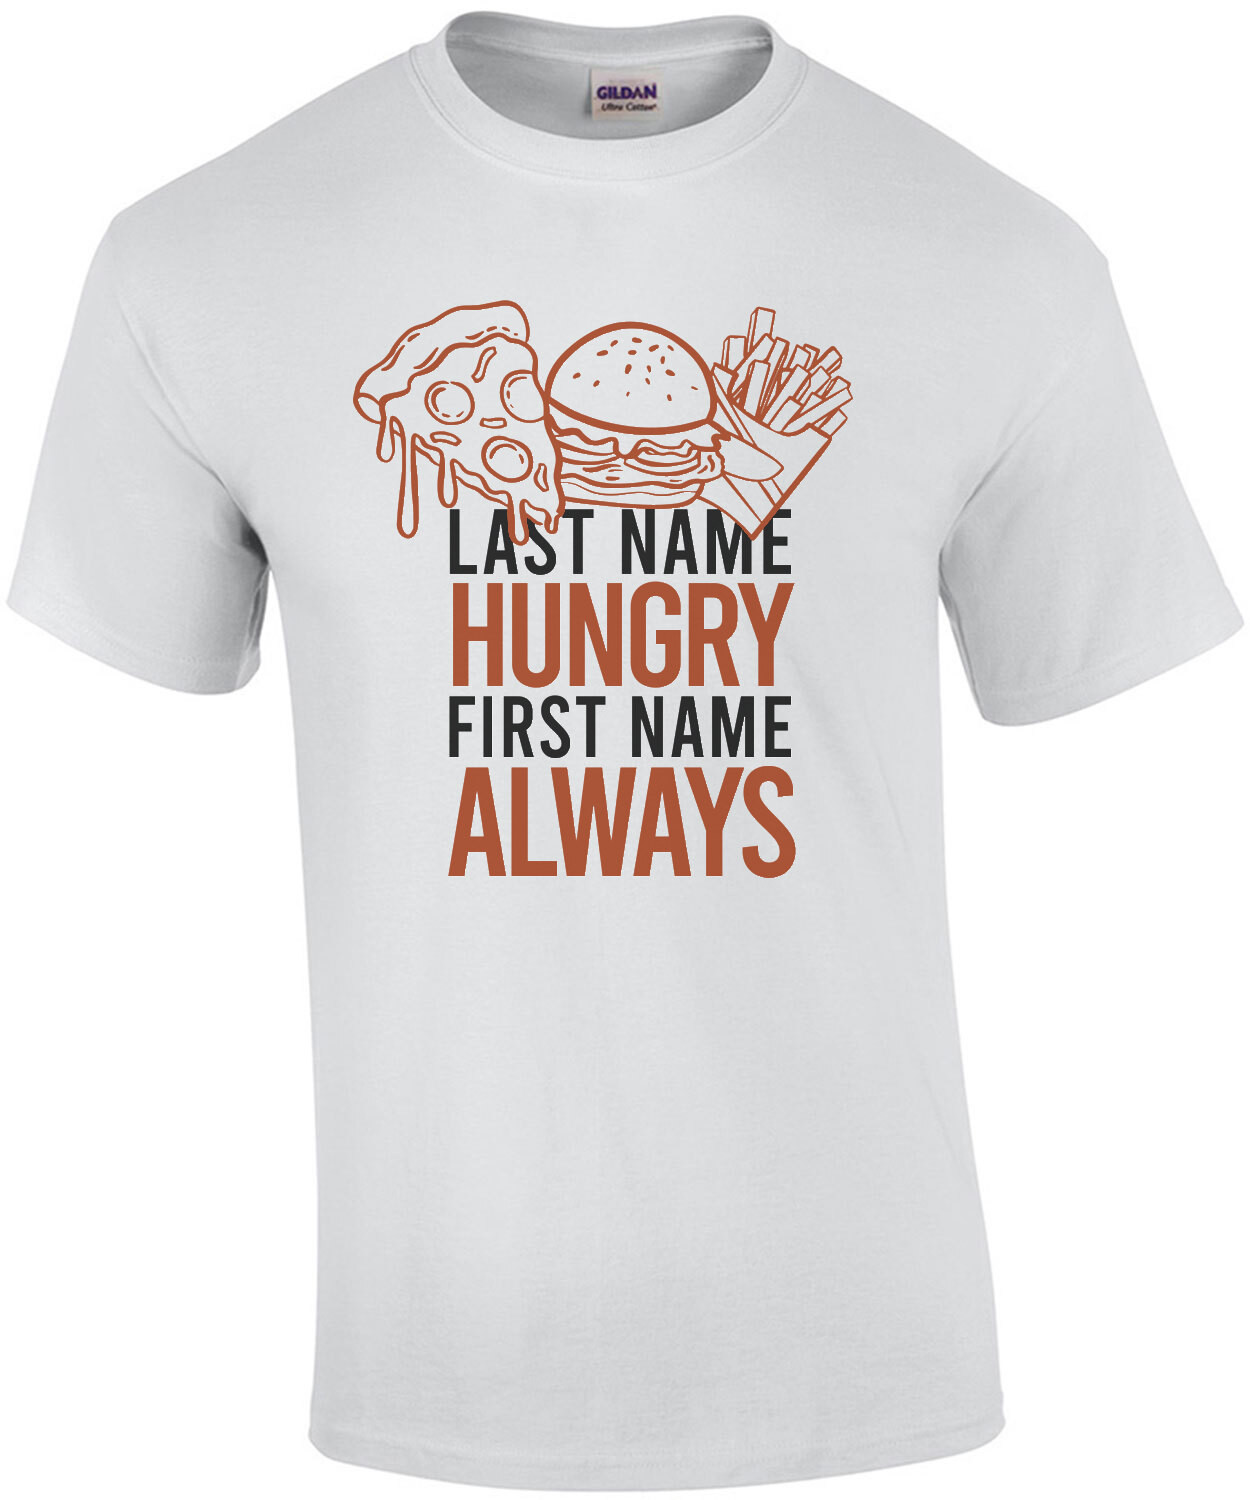 Last name hungry - First name always - fat t-shirt